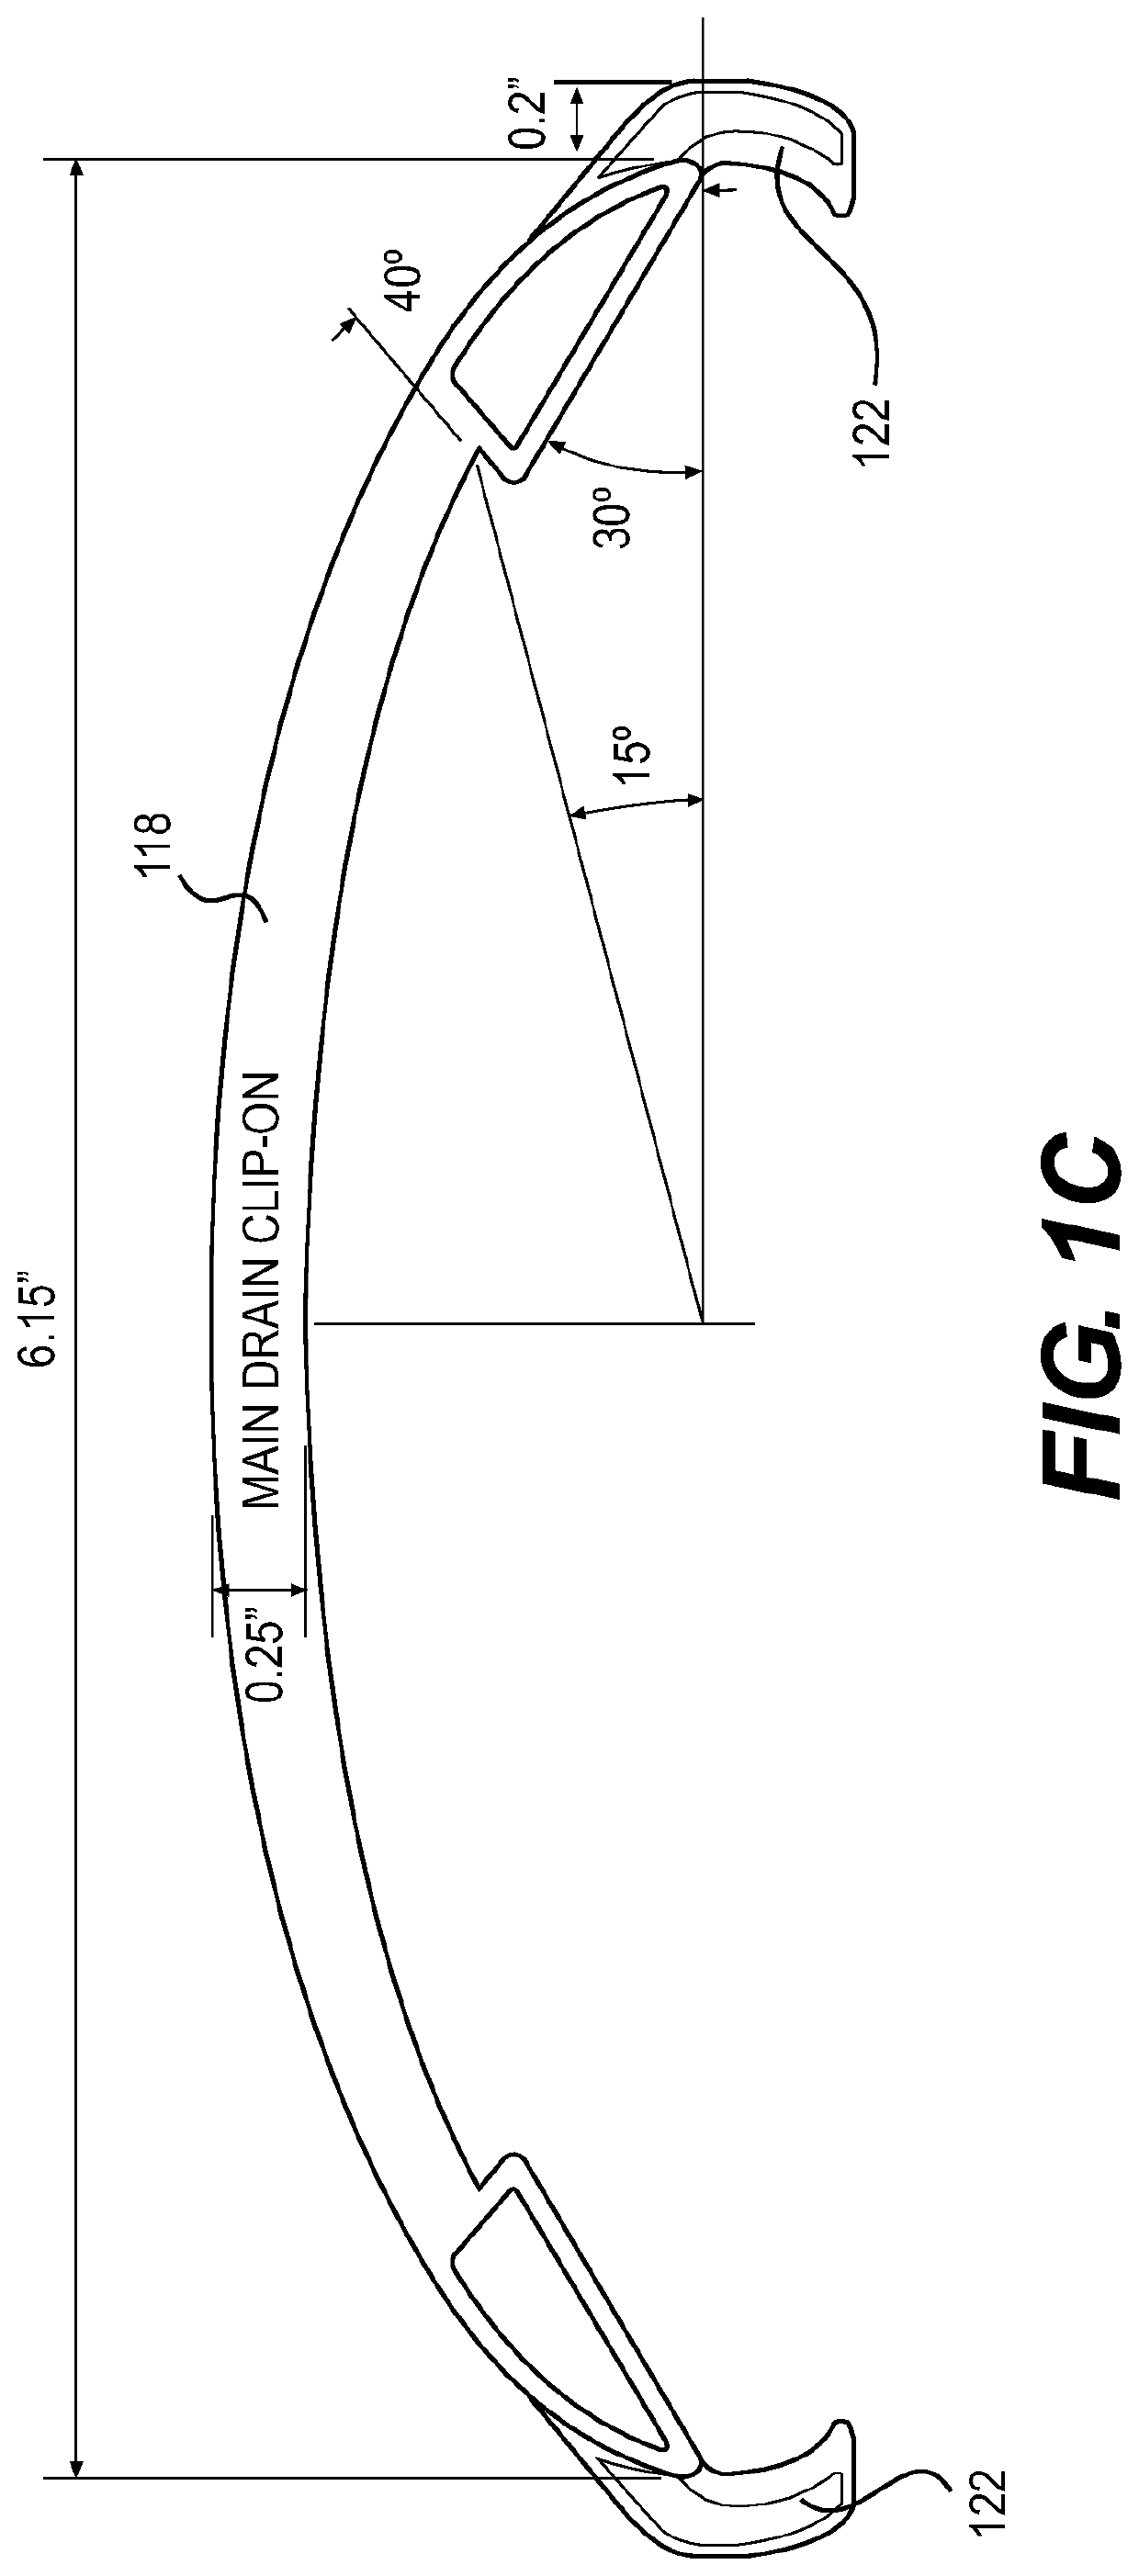 Kit and method for preventing a swimming pool cleaner from becoming caught on a main drain cover